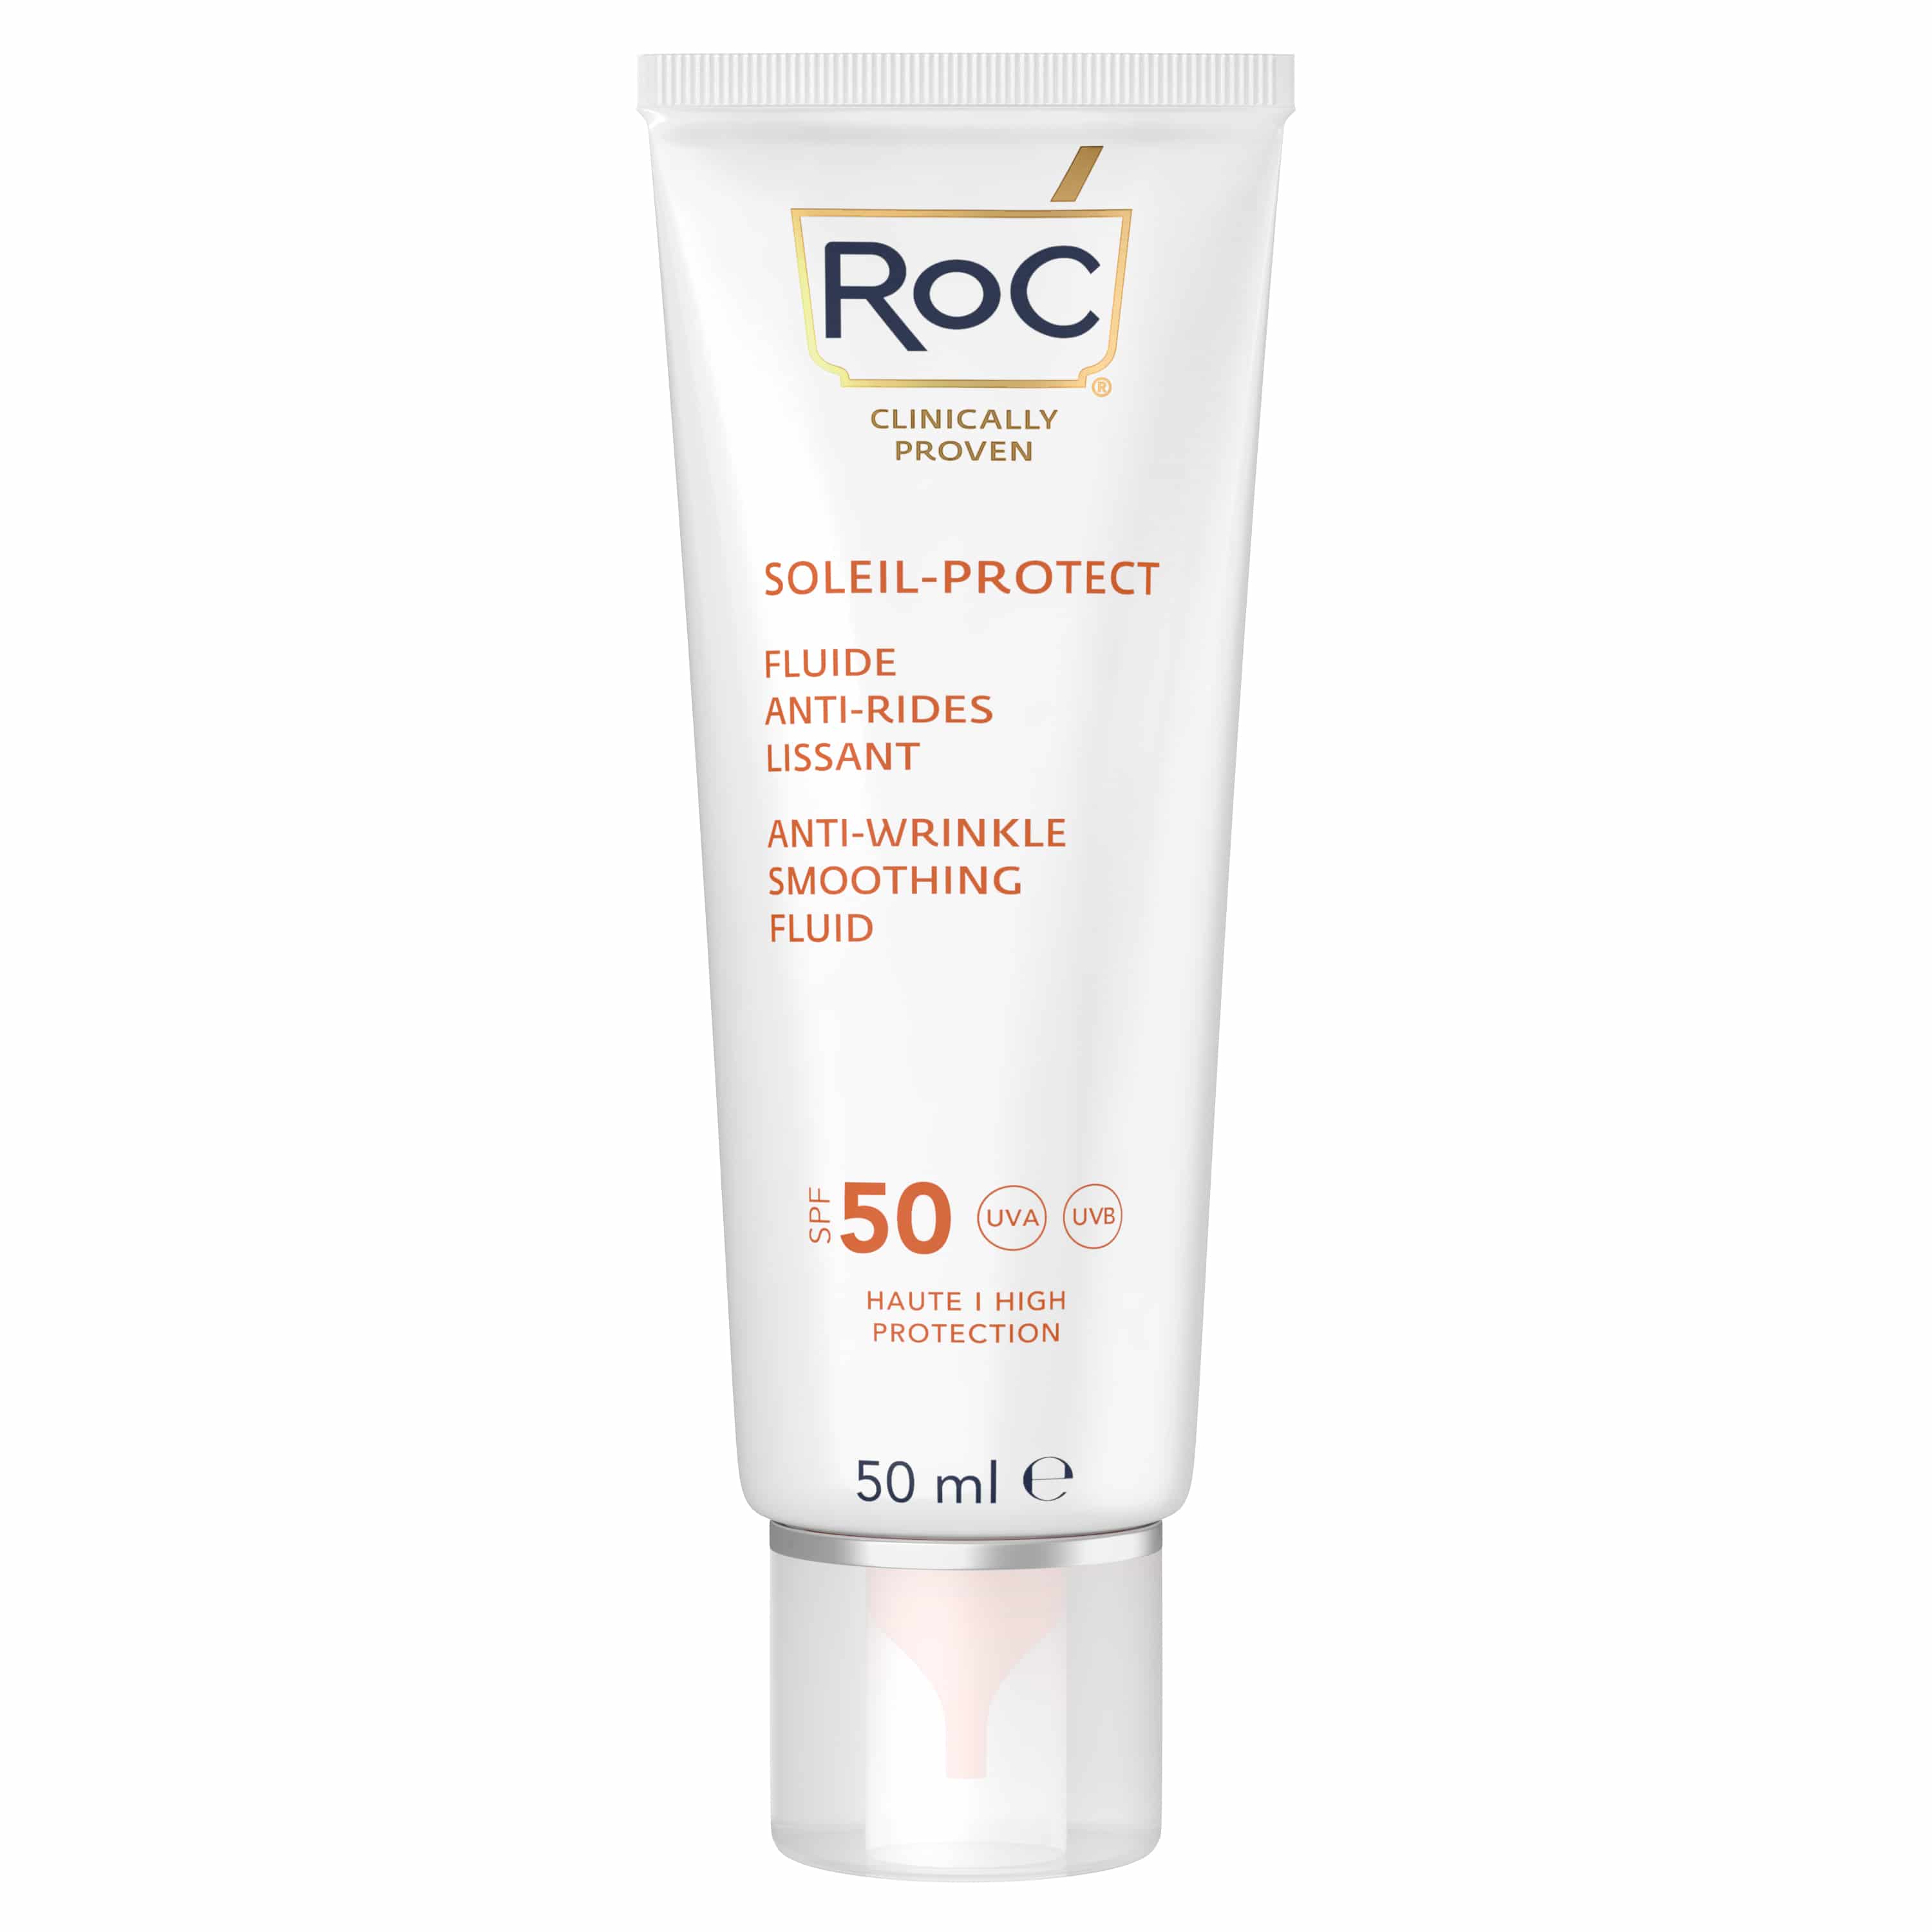 RoC Soleil-Protect Anti-Wrinkle Smoothing Fluid SPF50